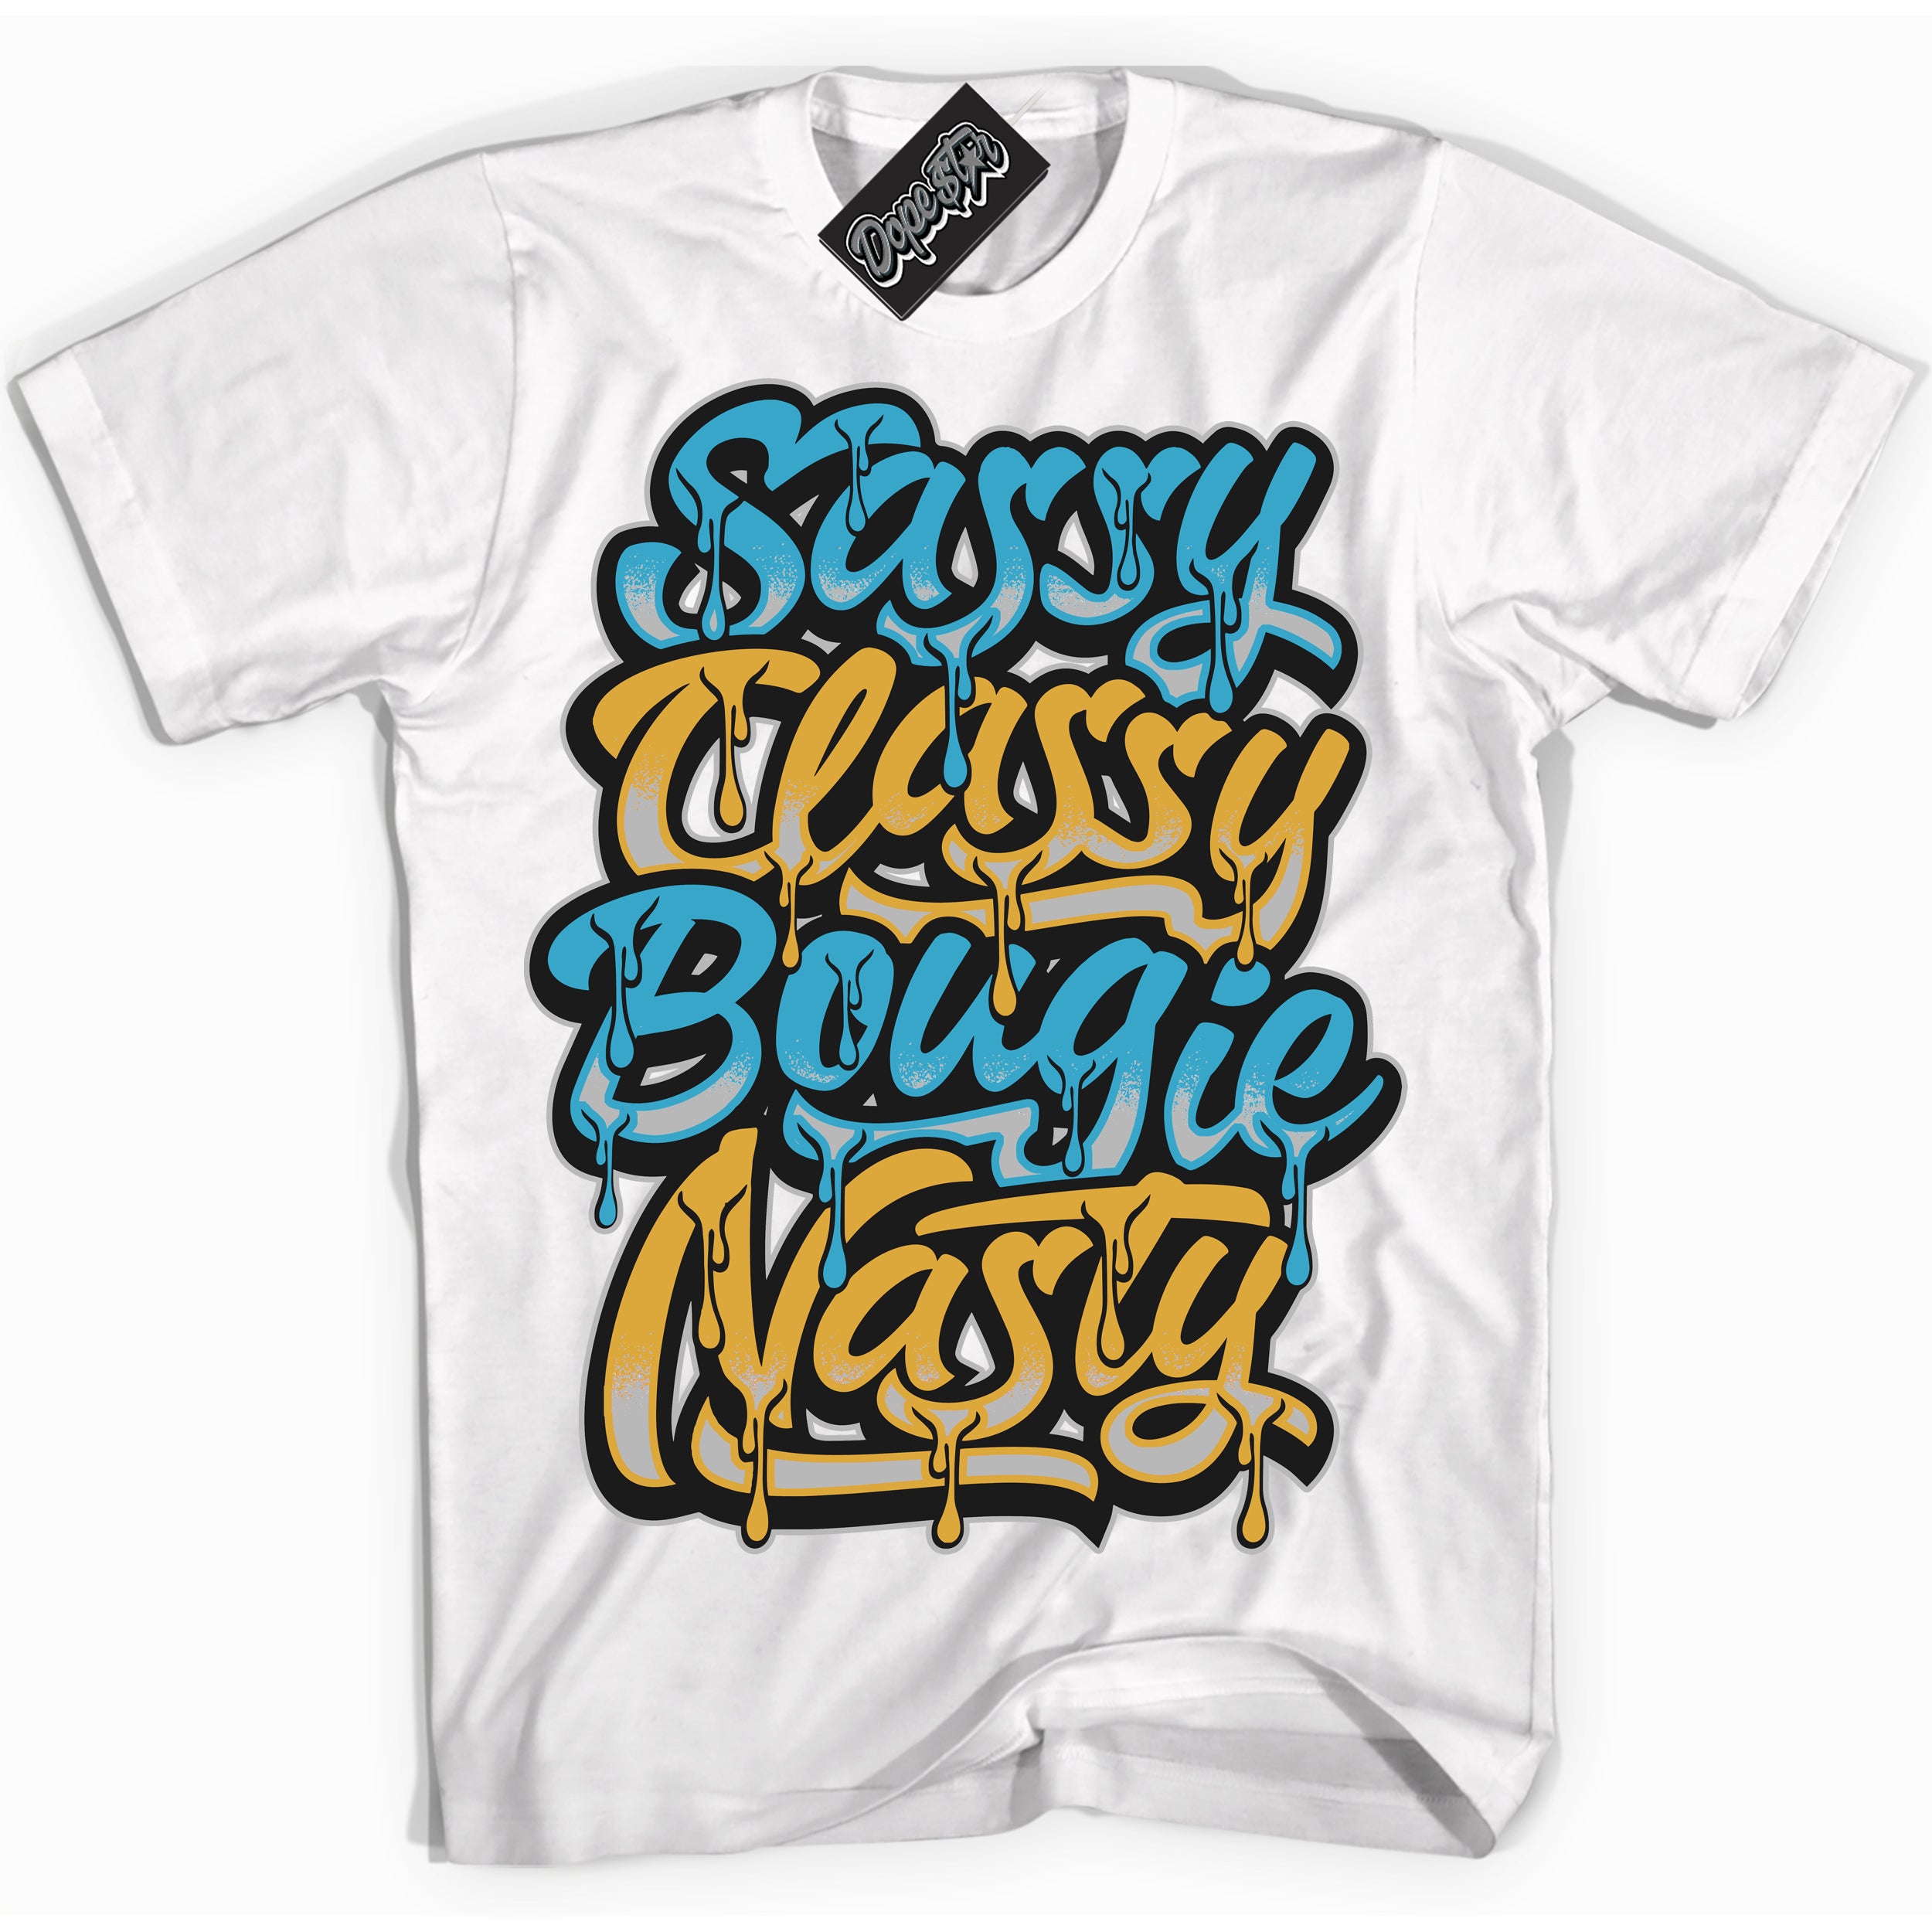 Cool White Shirt with “ Sassy Classy” design that perfectly matches Aqua 5s Sneakers.